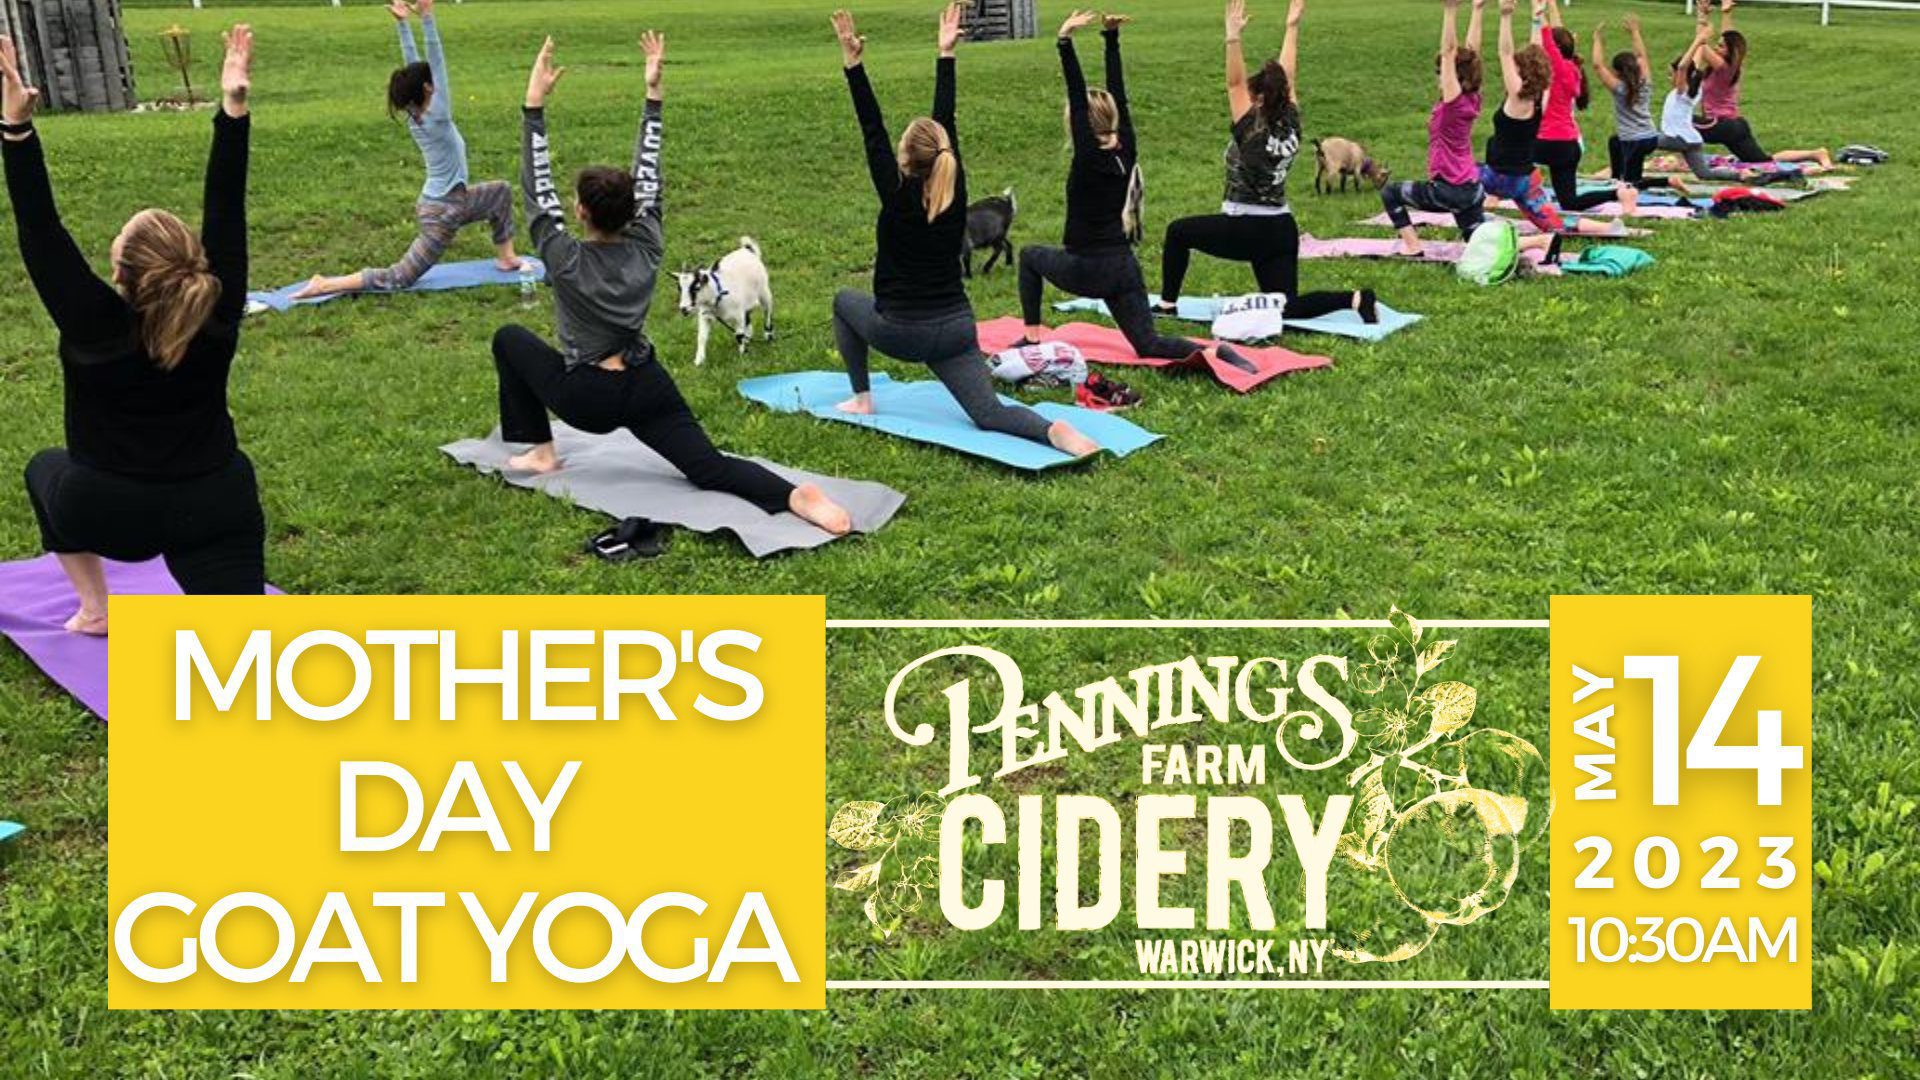 Mother's Day Goat Yoga @ Pennings Farm Cidery